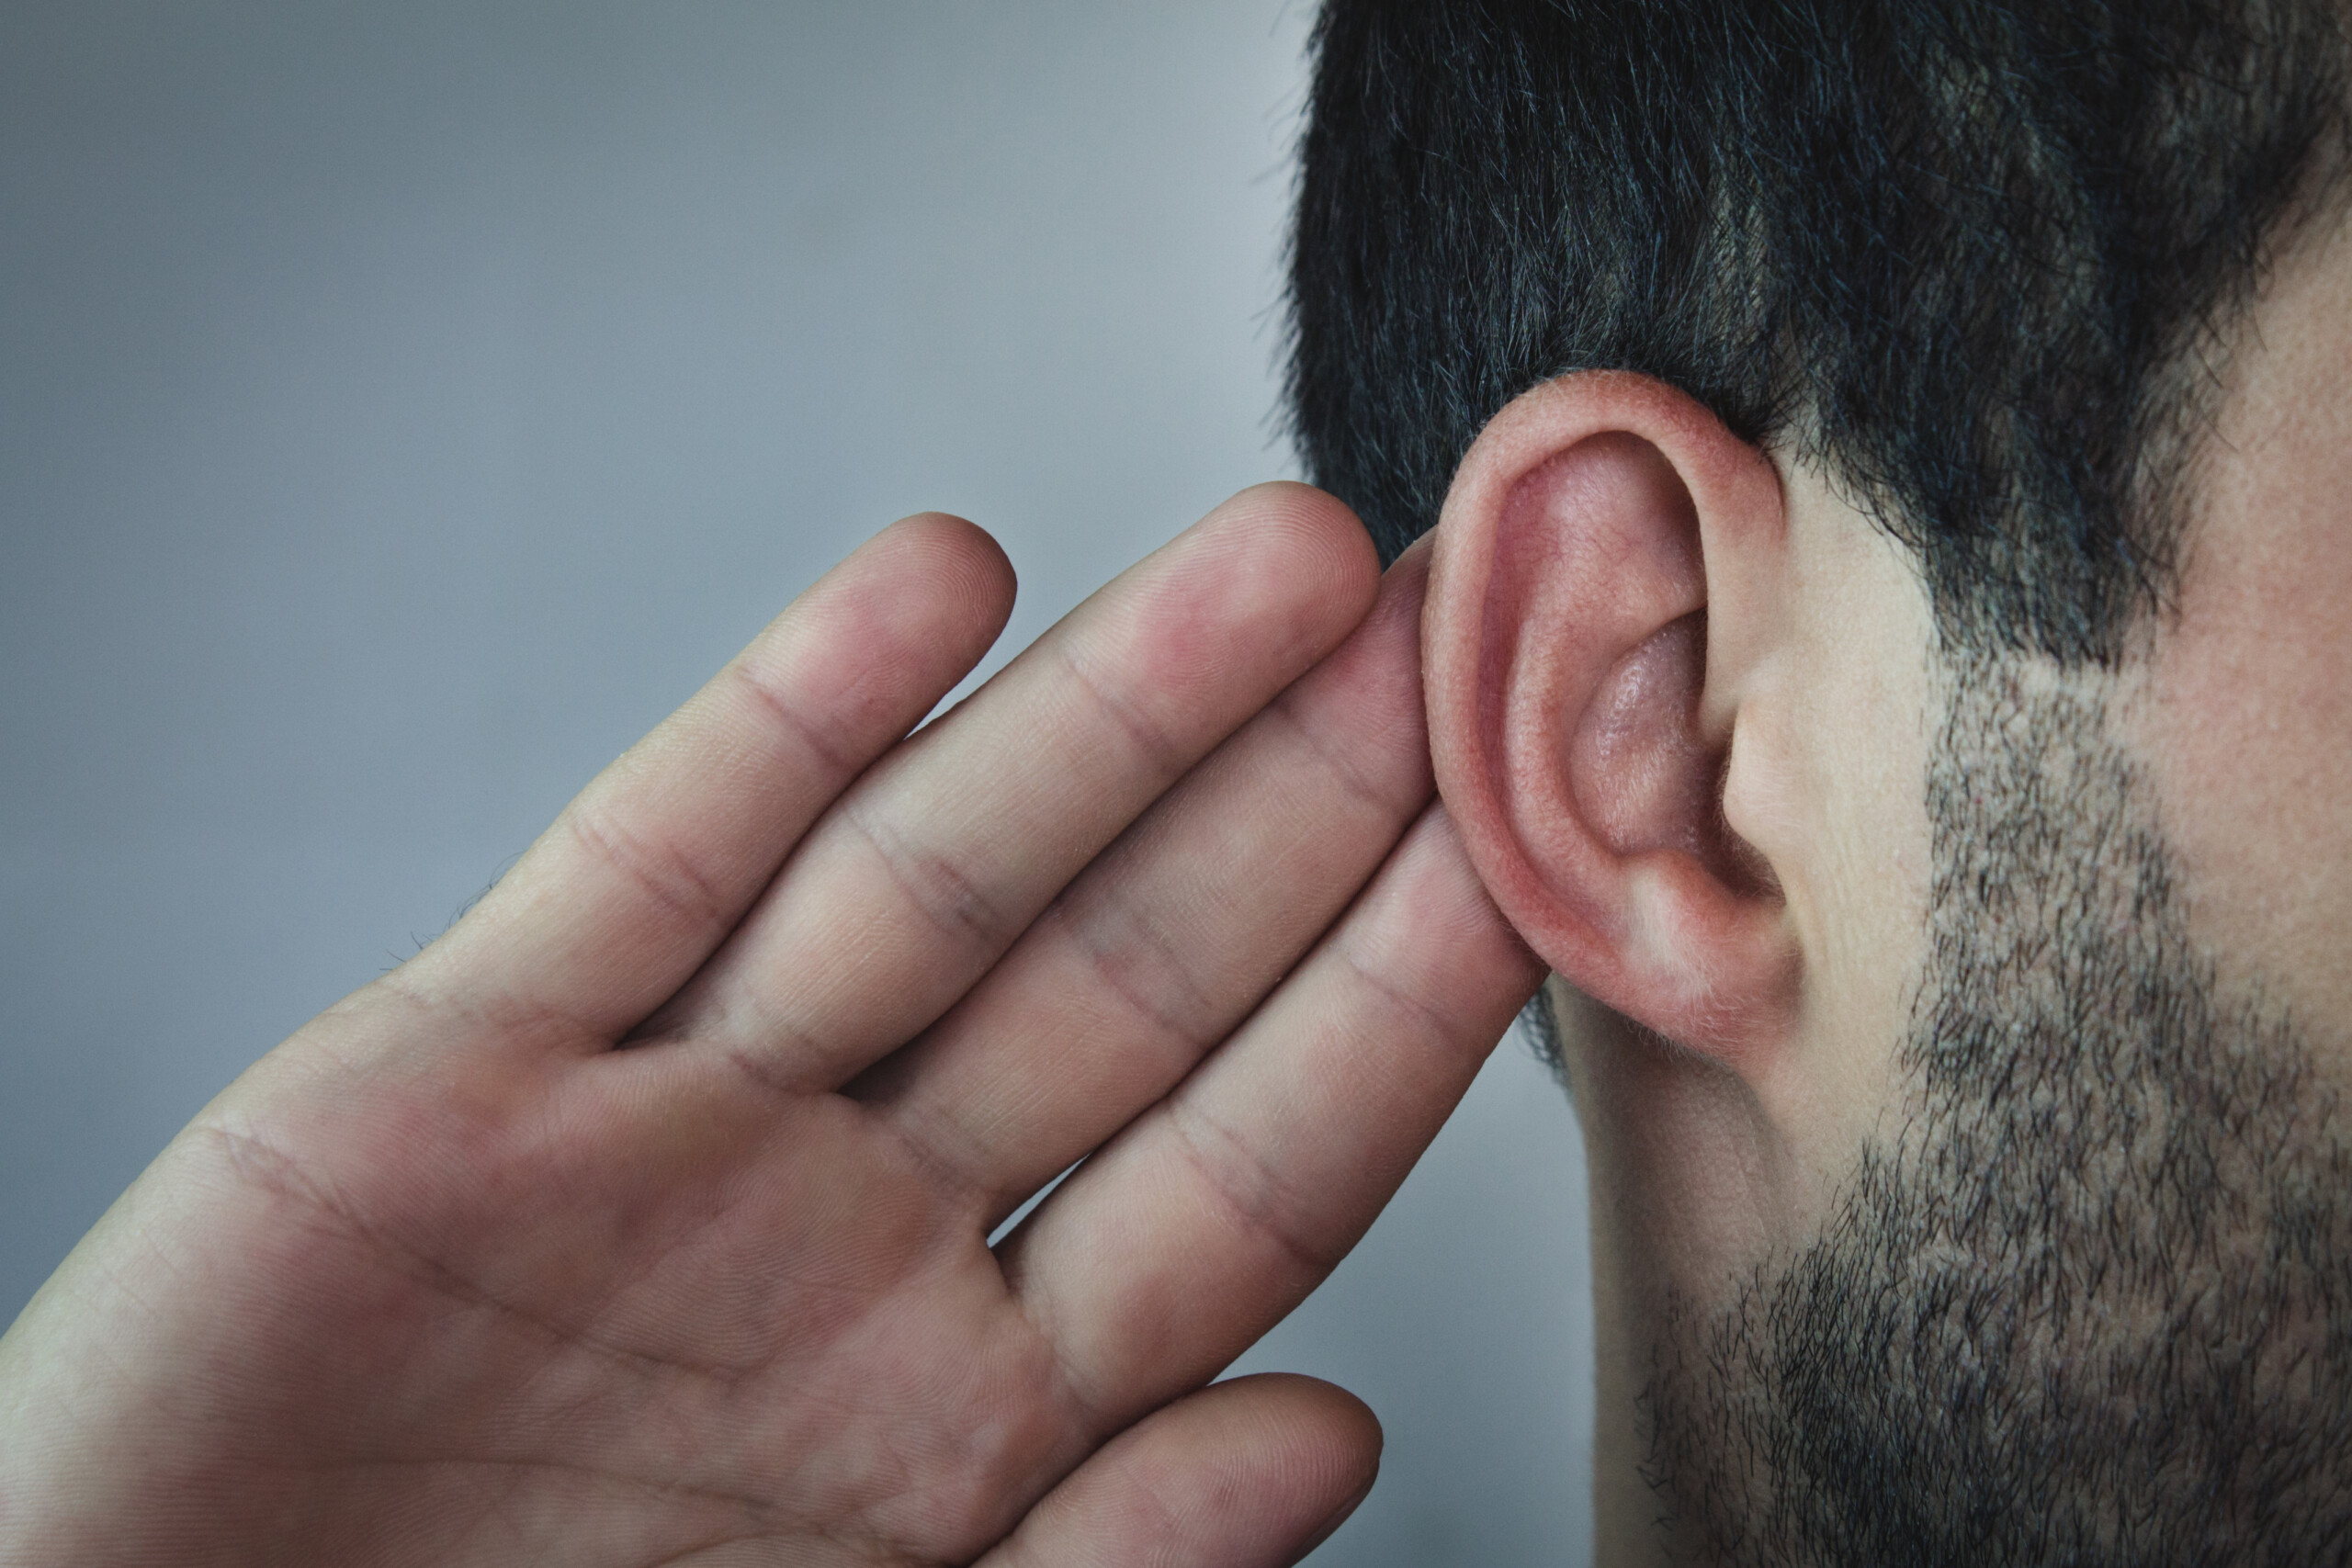 How Soon After Tinnitus Is Hearing Loss from Acoustic Neuroma?